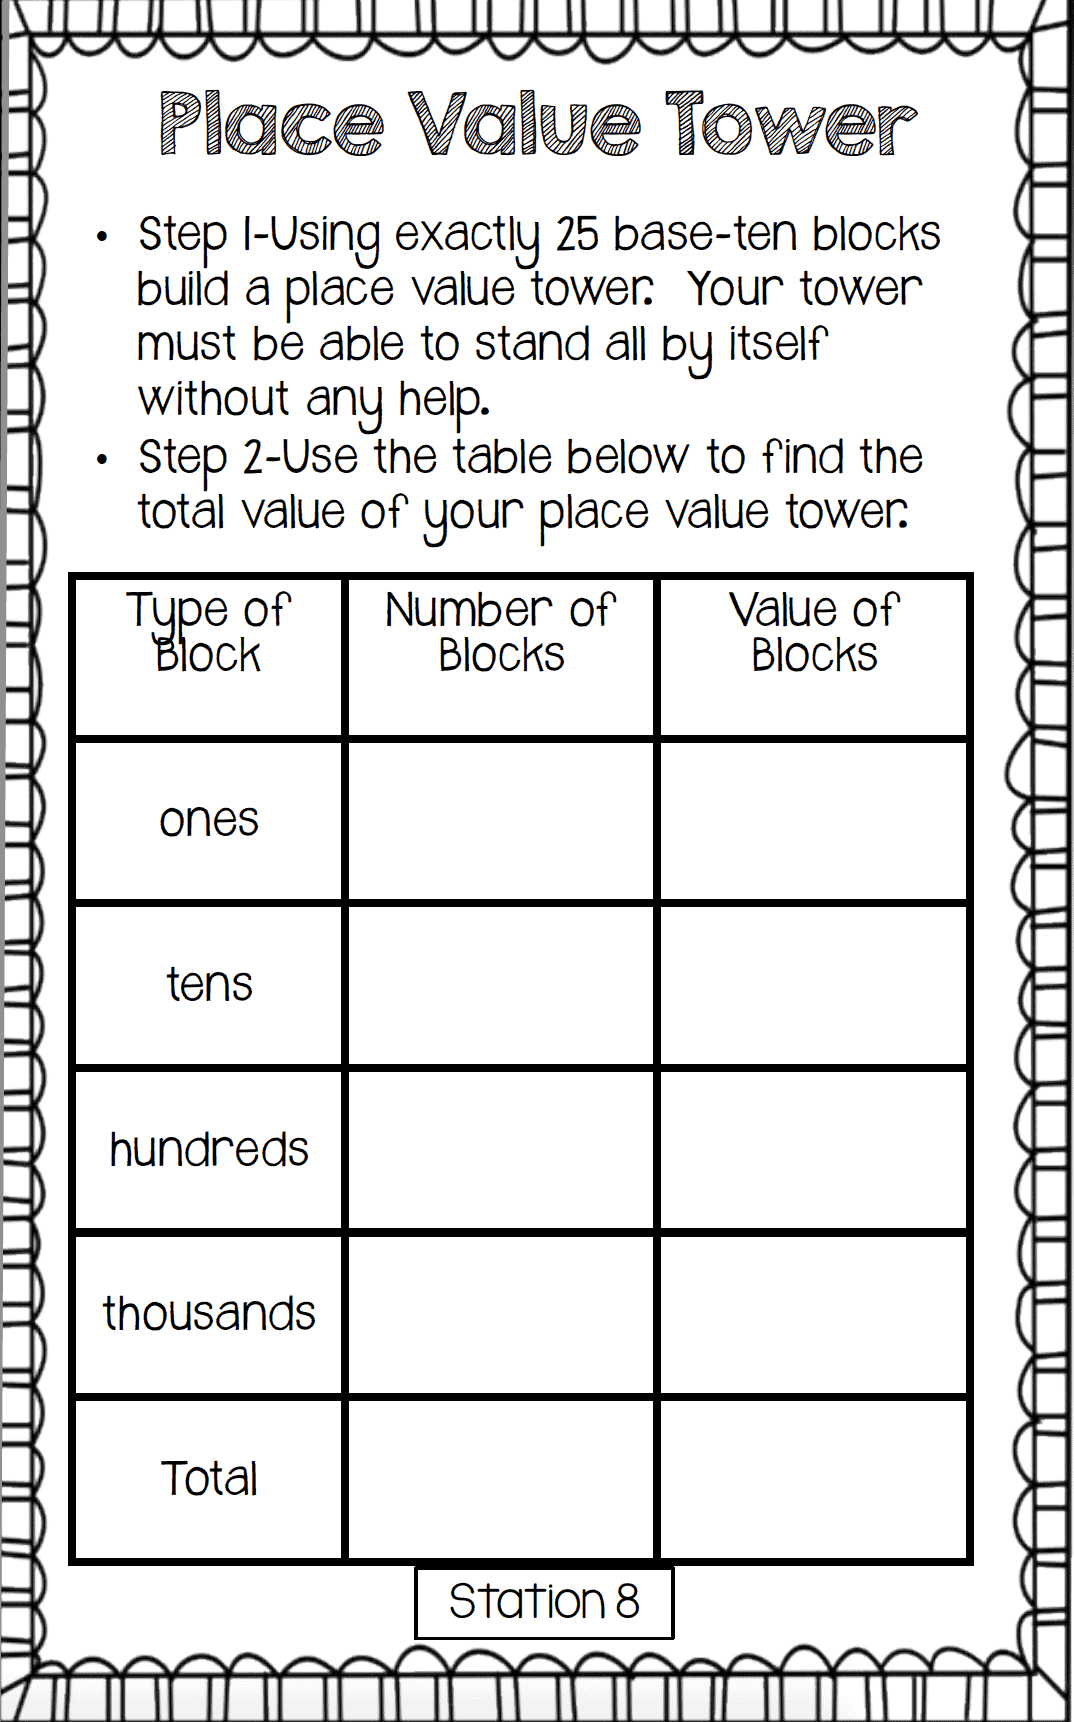 Place value is a really foundational math skill in 3rd grade, 4th grade, and 5th grade. However, it's always good to review place value concepts at the beginning of the new school year or for test prep before state testing. I'm sharing some fun hands-on place value activities in this blog post, so click through to read my tips for upper elementary math teachers!